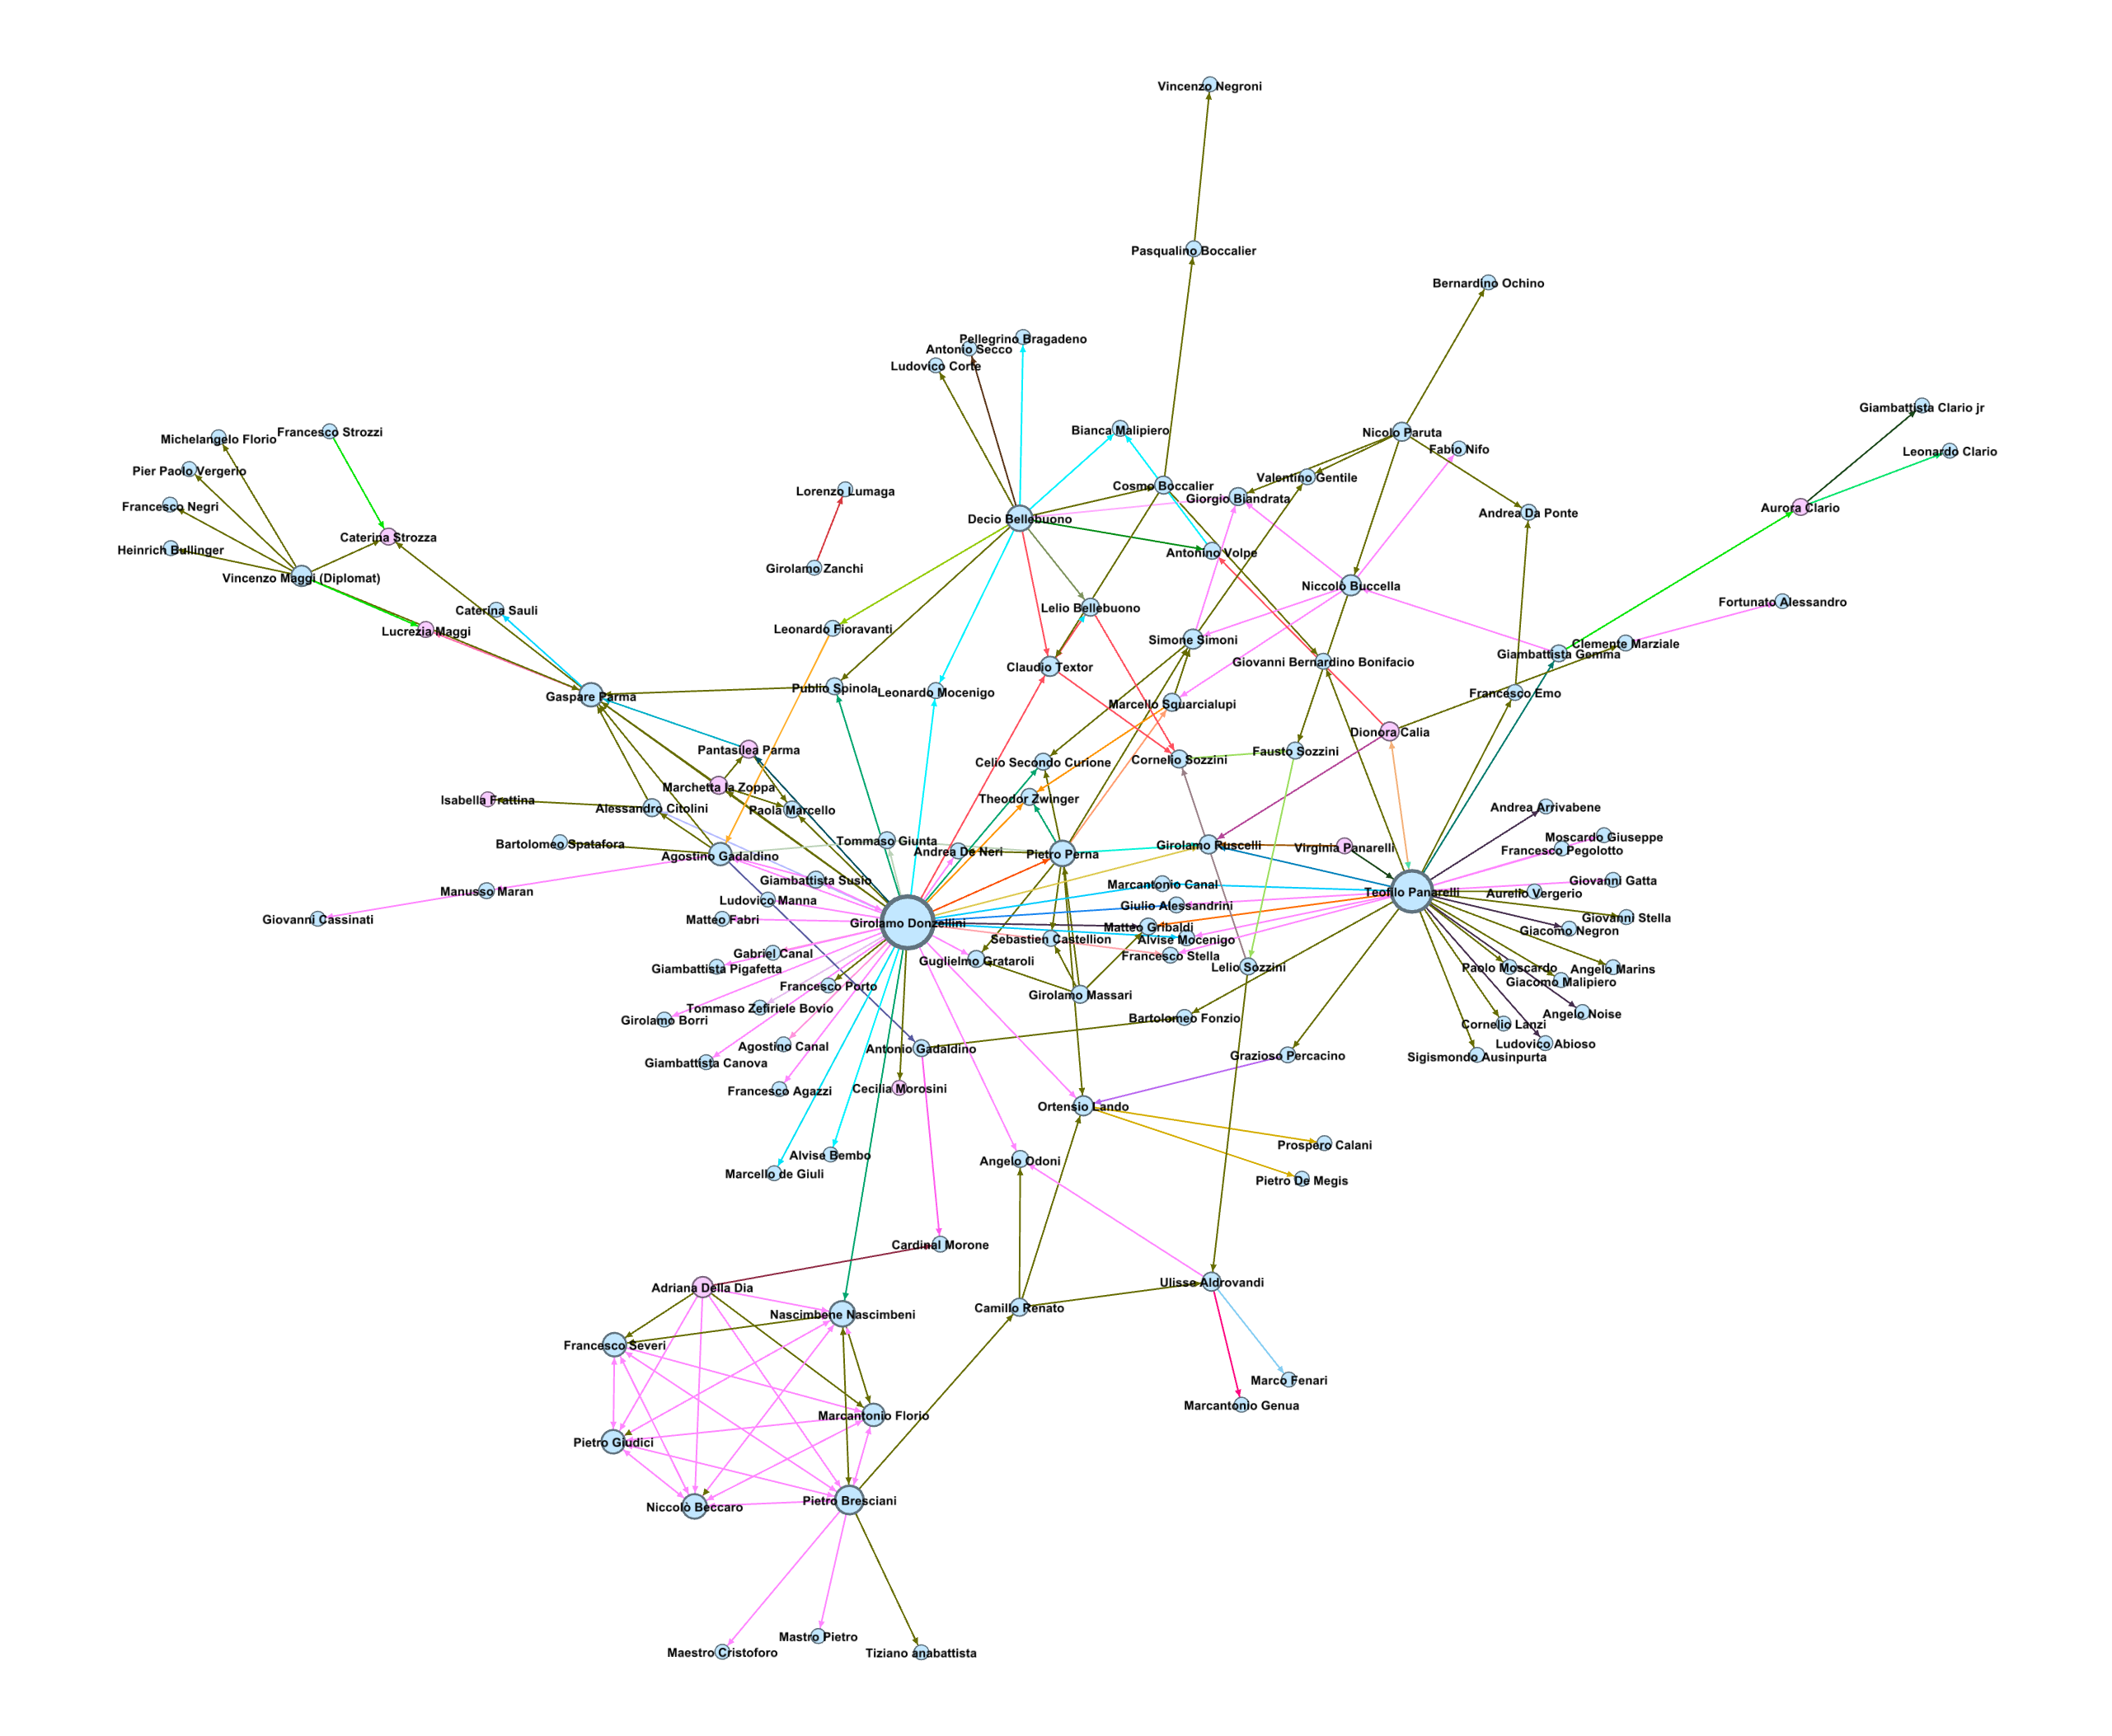 Heretical Physicians Interconnected, by Gender and Category<hr><p>Nodes:<br>Blue = Male<br>Pink = Female</p><p>Edges = category of connection<br>(See attached images)</p>